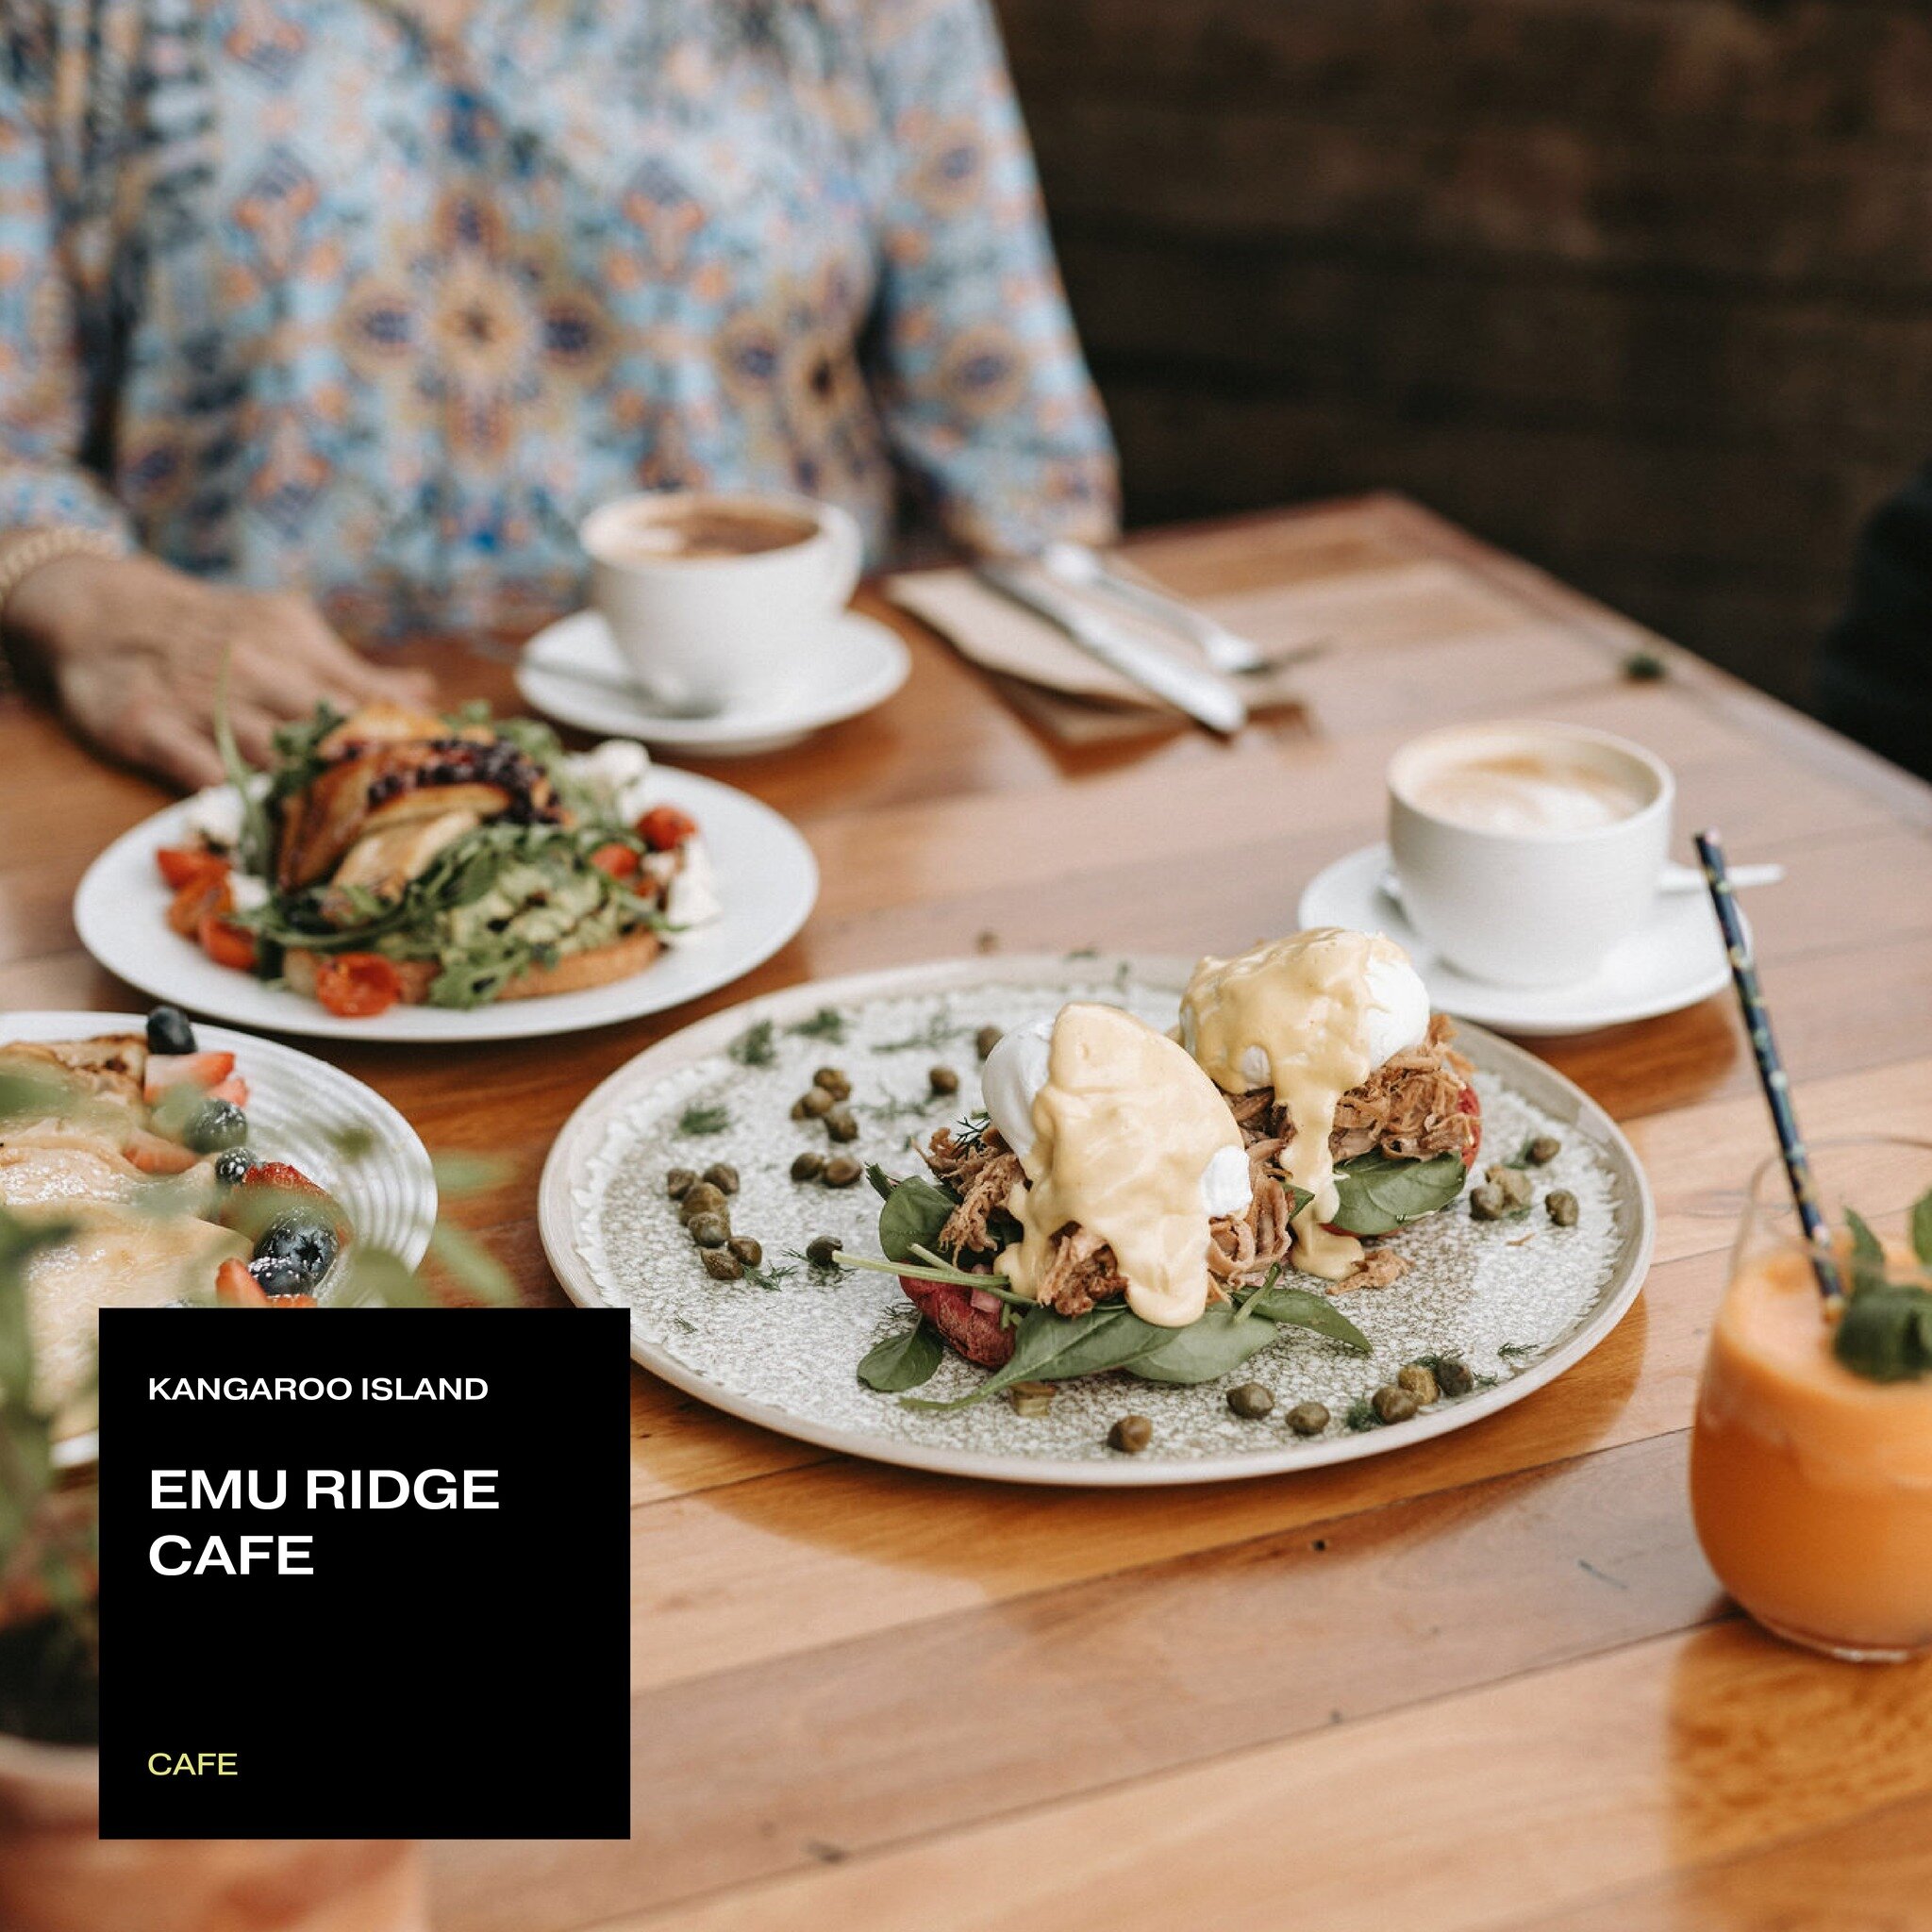 Wander through the native scrubland of KI and you might just stumble across one of their hidden gems &ndash; @emuridgeeucalyptus.
 
Known for its delicious breakfasts, lunches, snacks, and most importantly, its award-winning locally roasted barista c